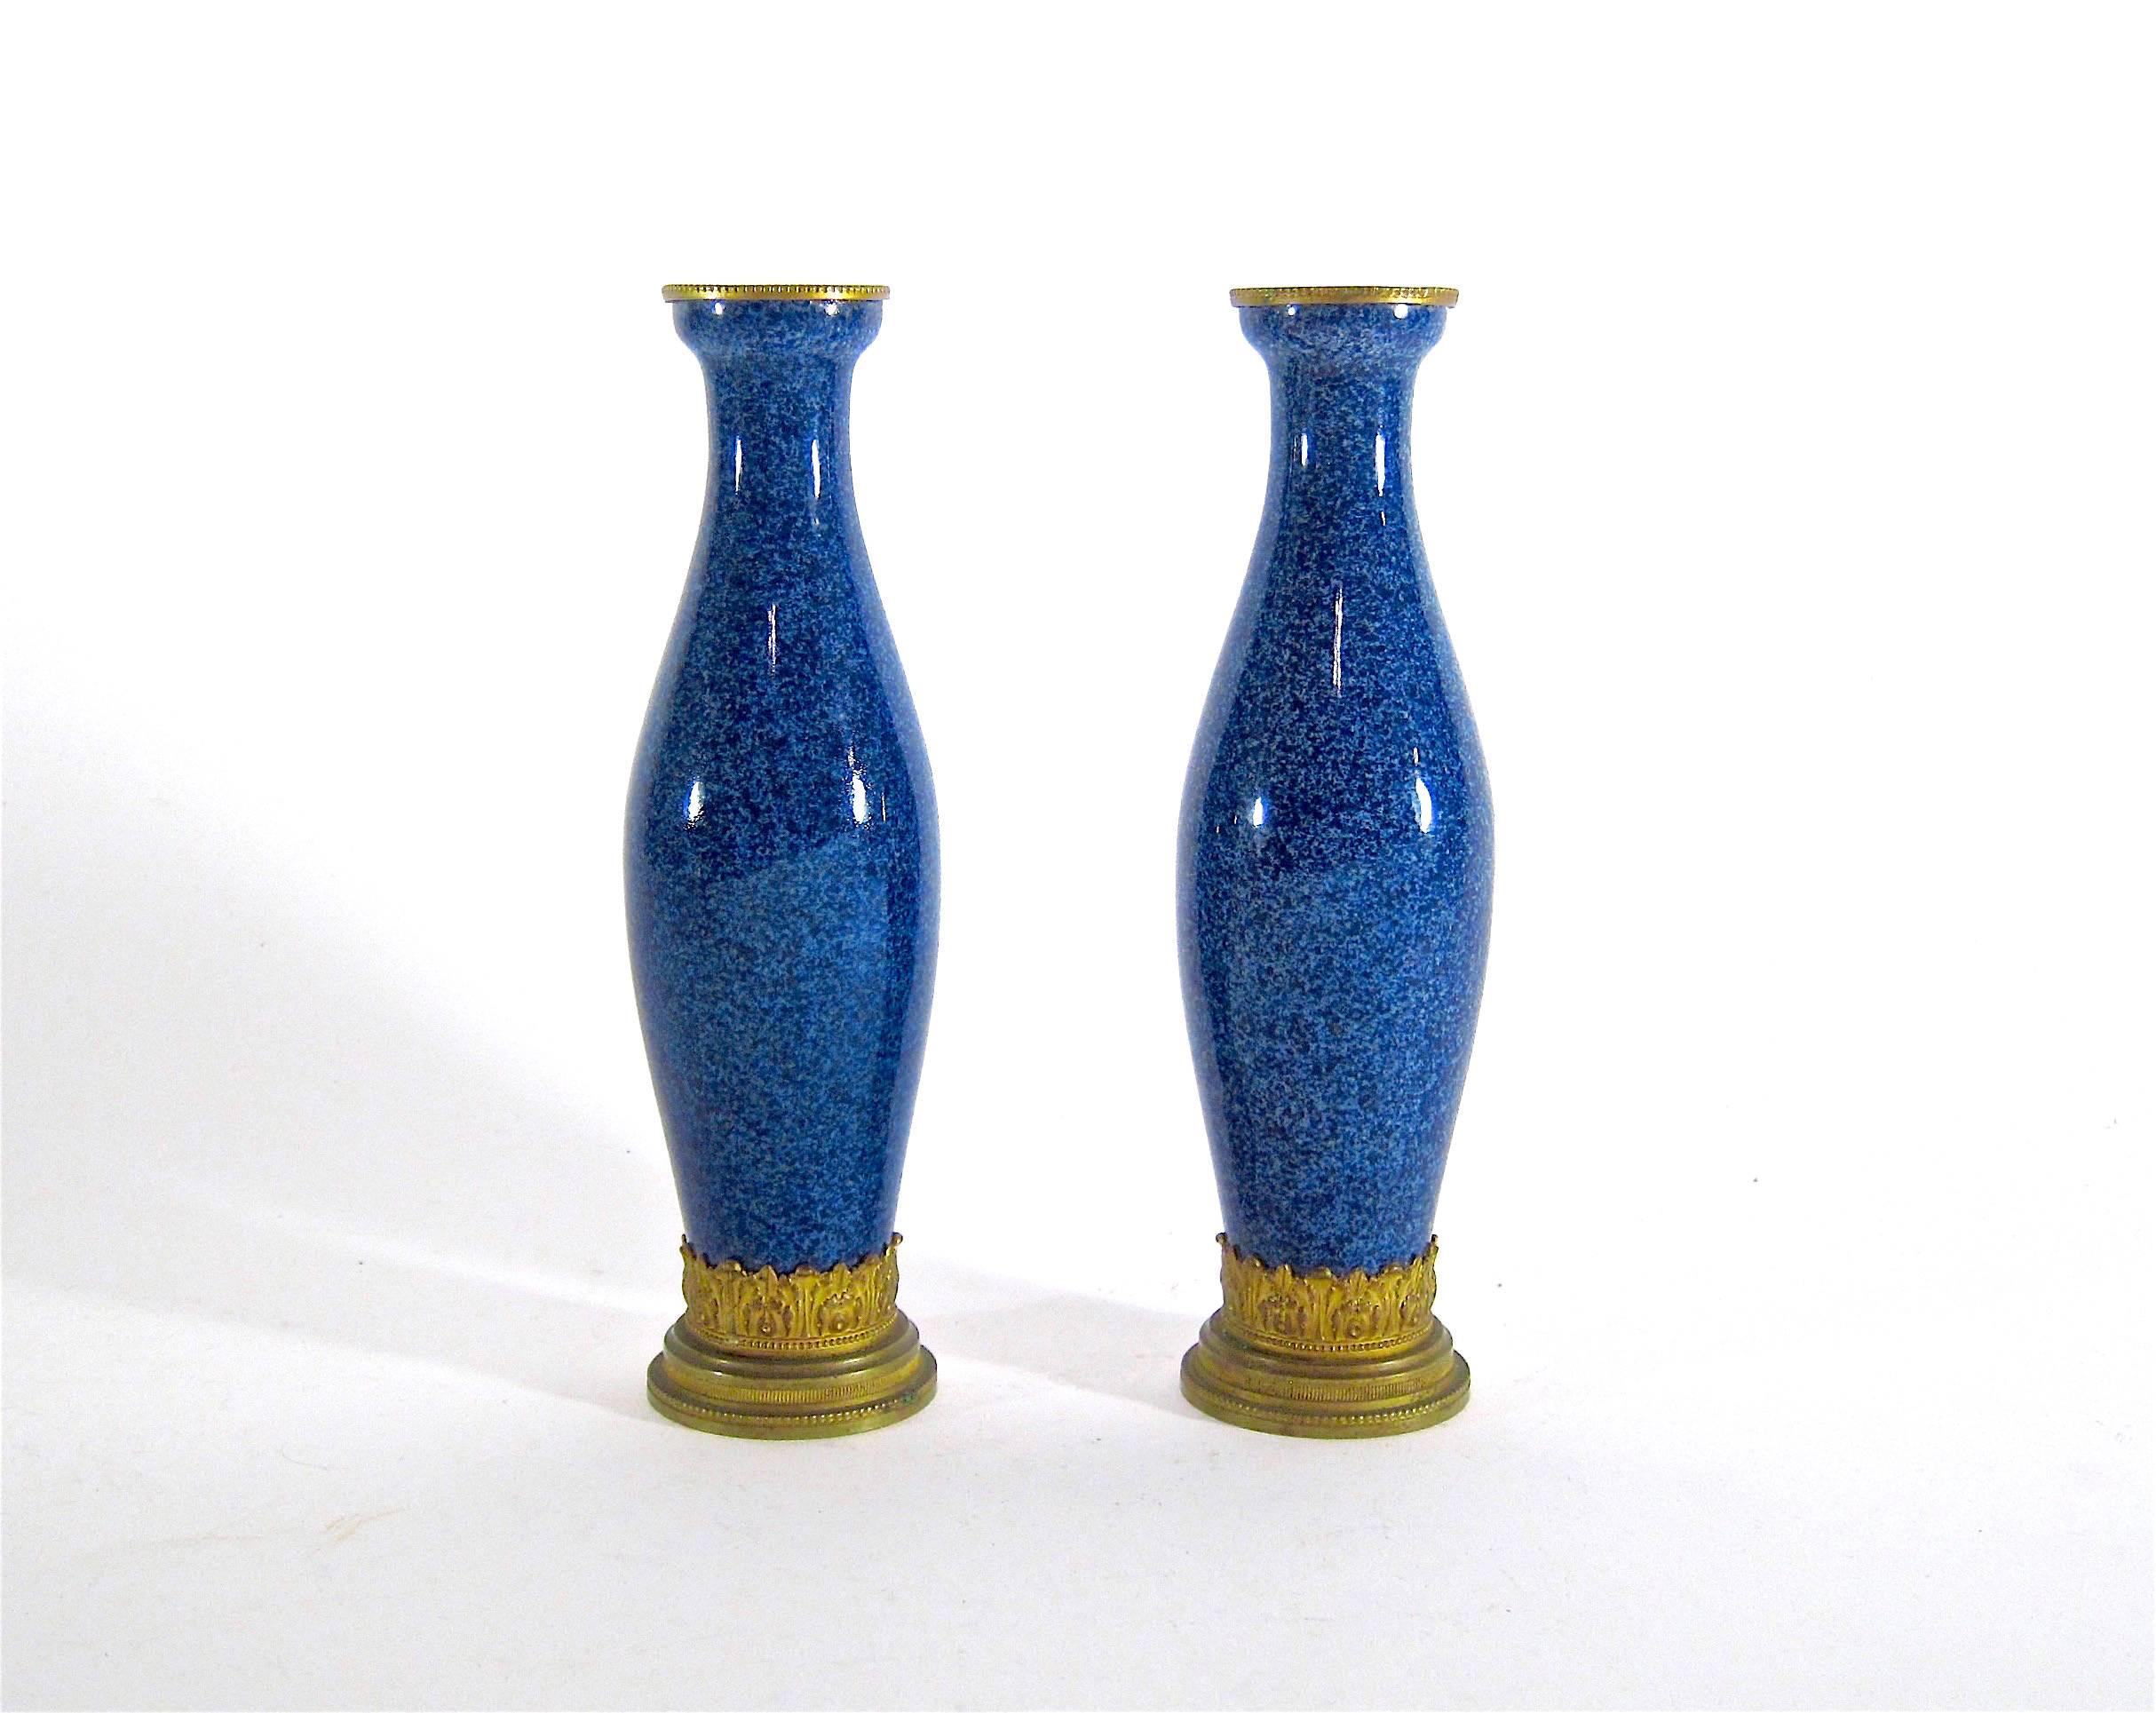 20th Century Paul Milet French Faience Vase Pair with Neoclassical Gilt Bronze Mounts